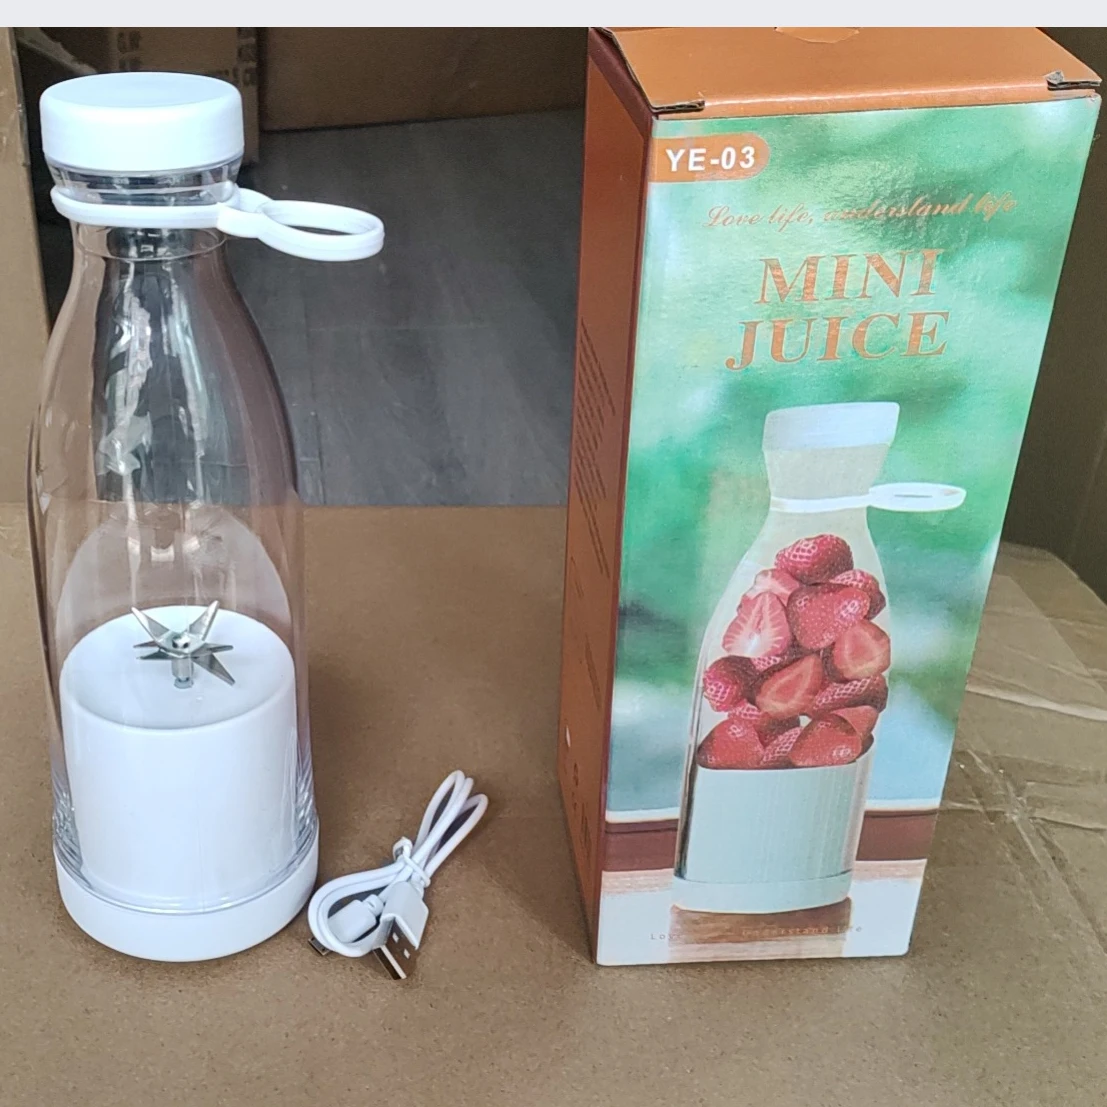 DD1554  Portable 6 Blades Electric Mini Juicing Bottle Home USB Squeezer Wireless Rechargeable Fruit Juicer Cup Blenders